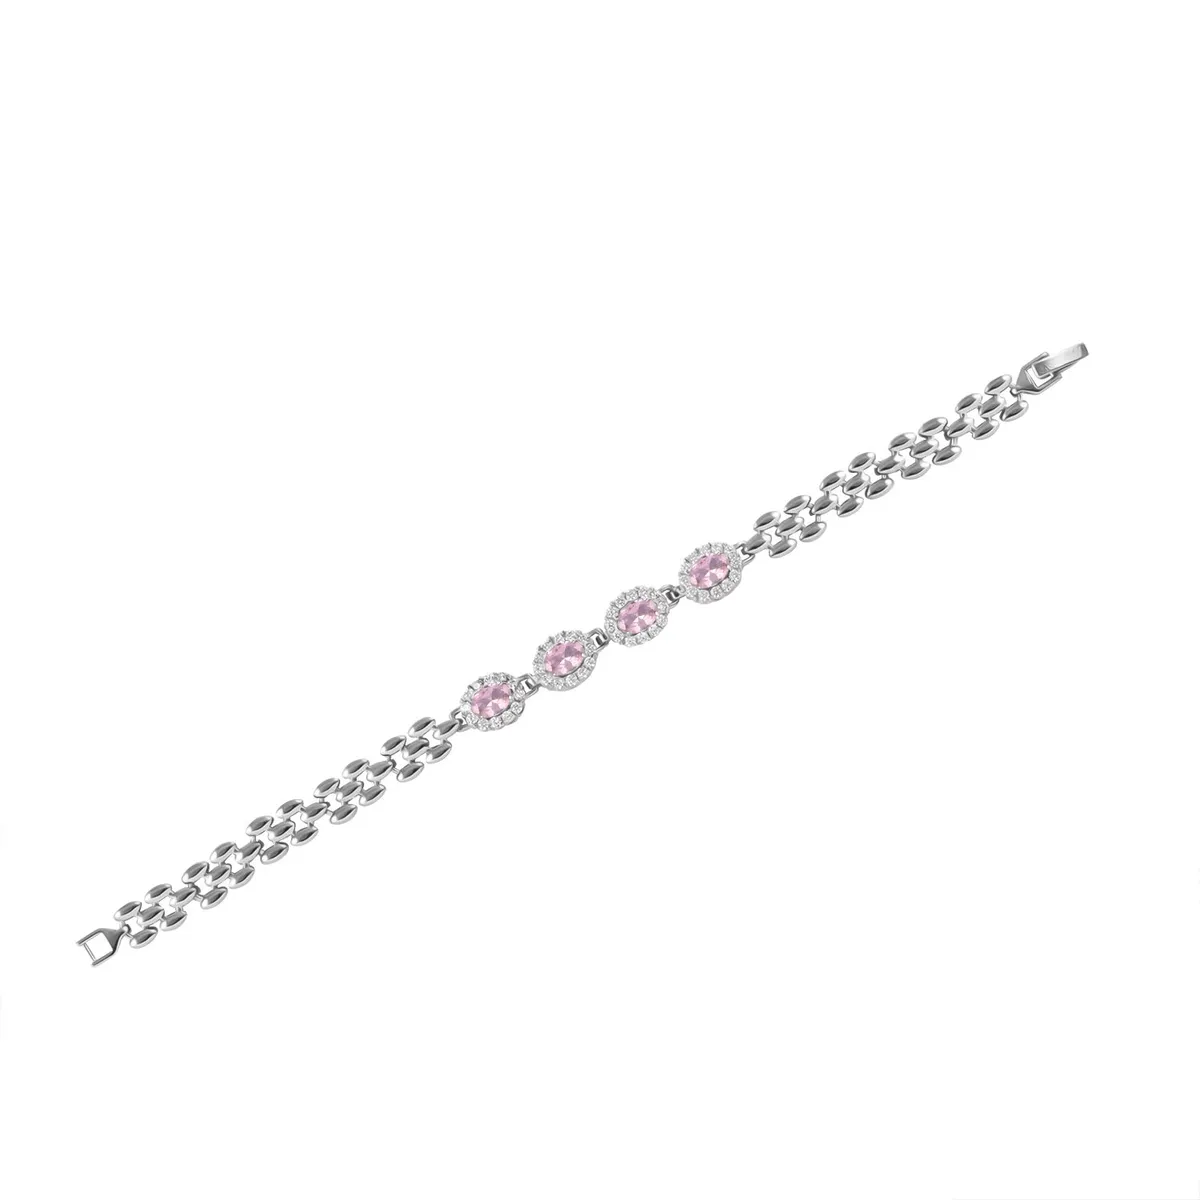 Ankur Treasure Chest Pink and White Simulated Diamond Bracelet and Earrings